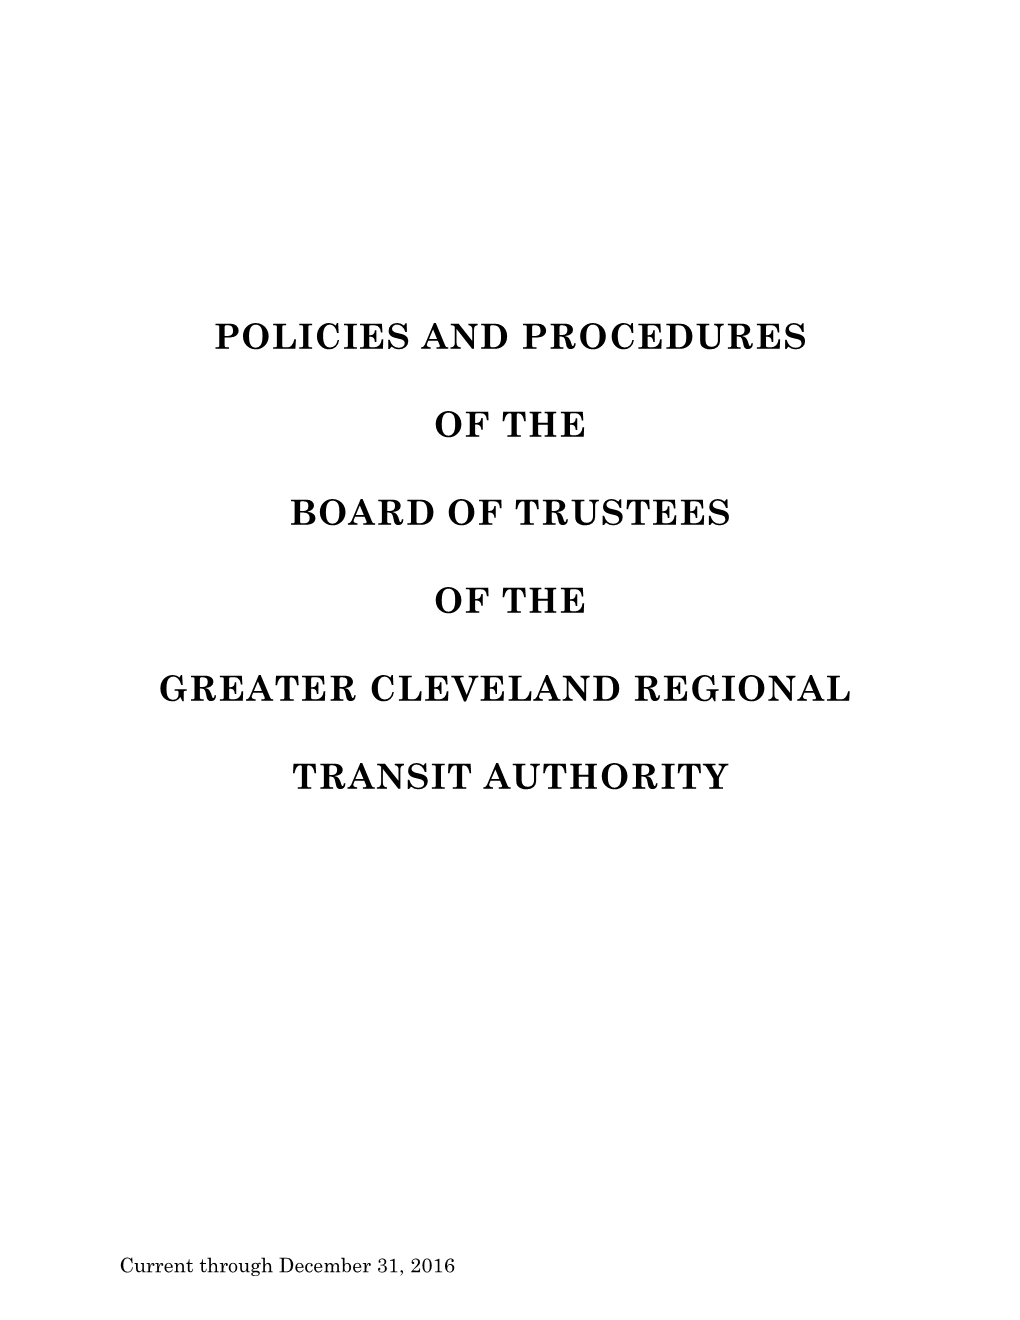 Policies and Procedures of the Board of Trustees of the Greater Cleveland Regional Transit Authority, Complete Through December 31, 2016